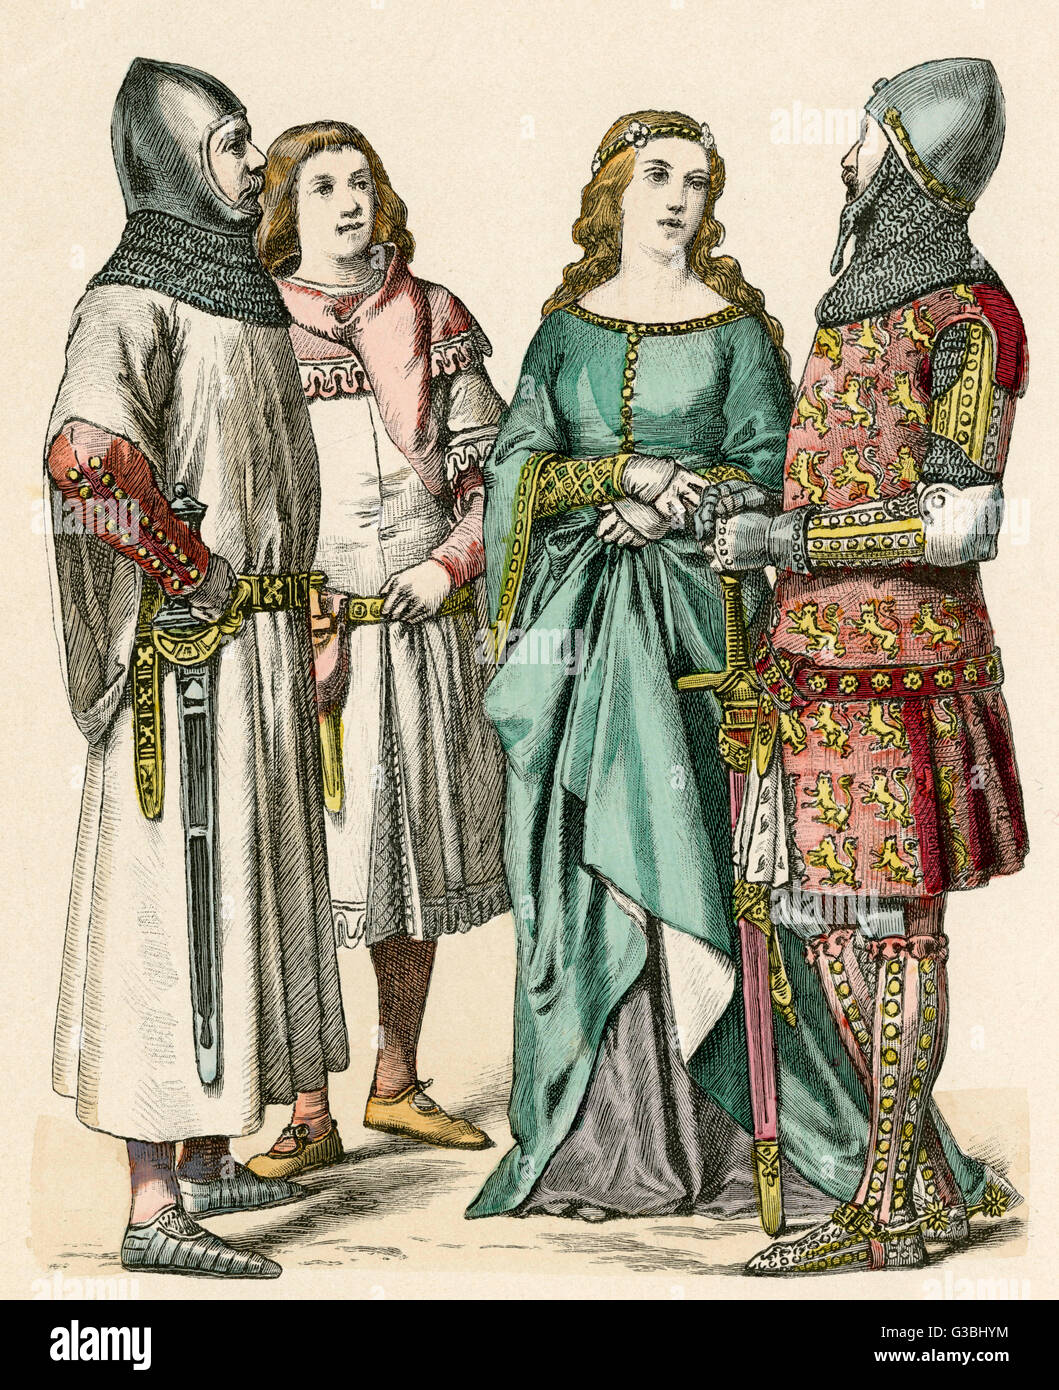 Men: gipon, dagged hood, cote- hardie with dagged tippets, girdles ...